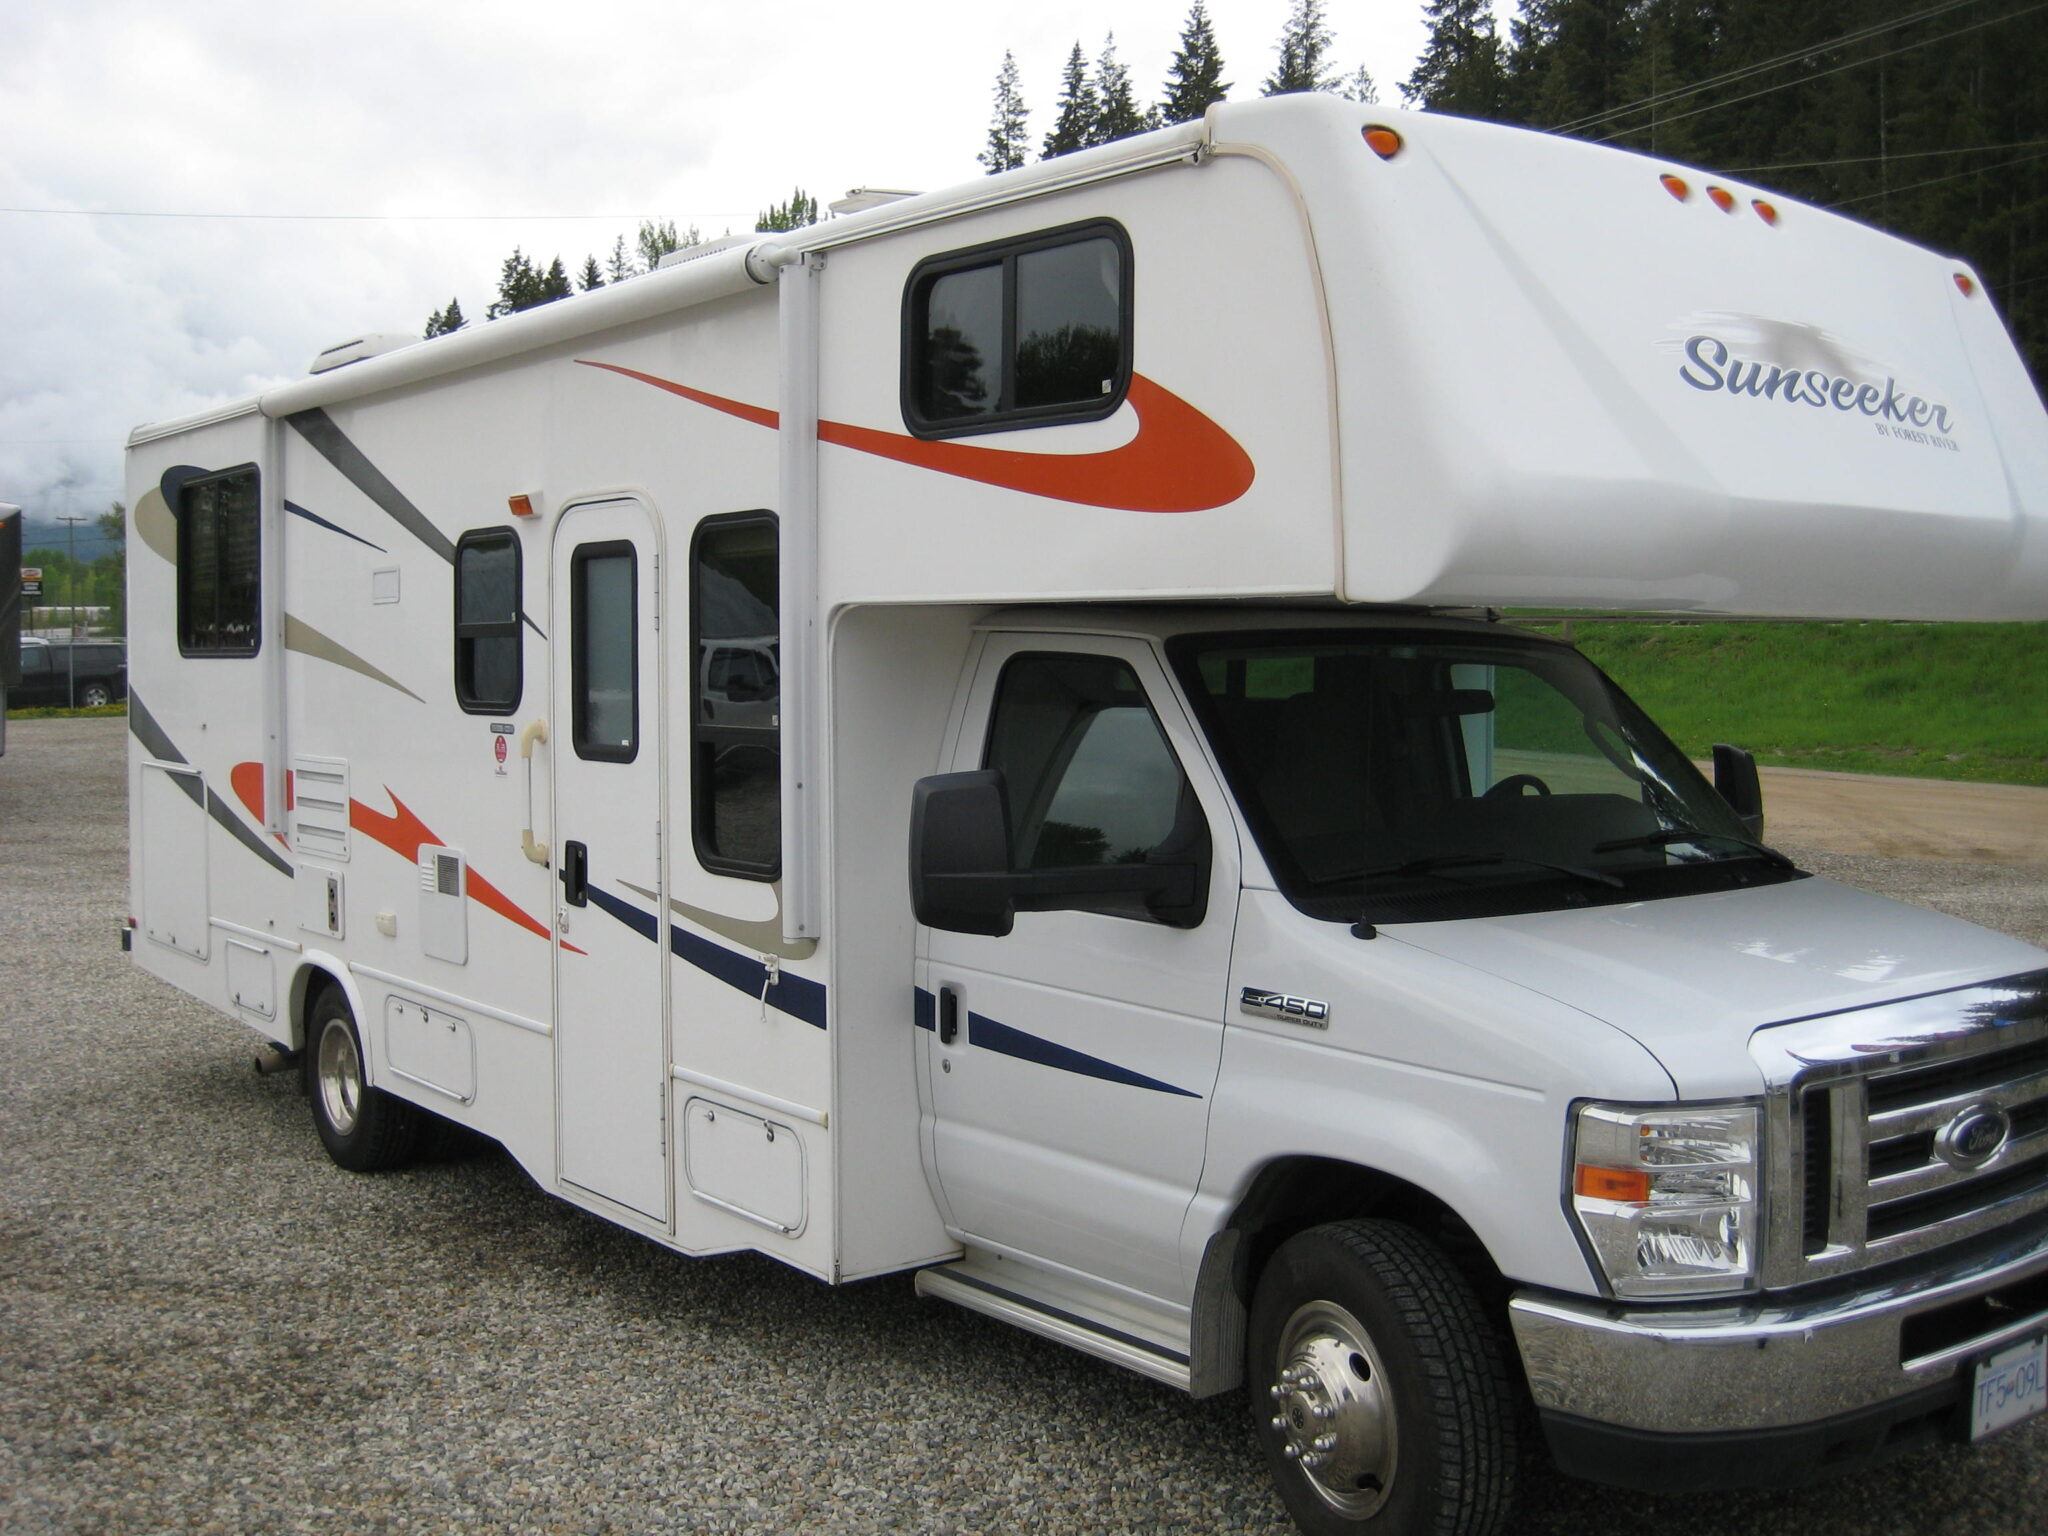 2012 FORD SUNSEEKER CLASS “C” MOTORHOME $ 64,995.00 CONSIGNMENT !!!!! DON’T MISS THIS ONE !!!!!